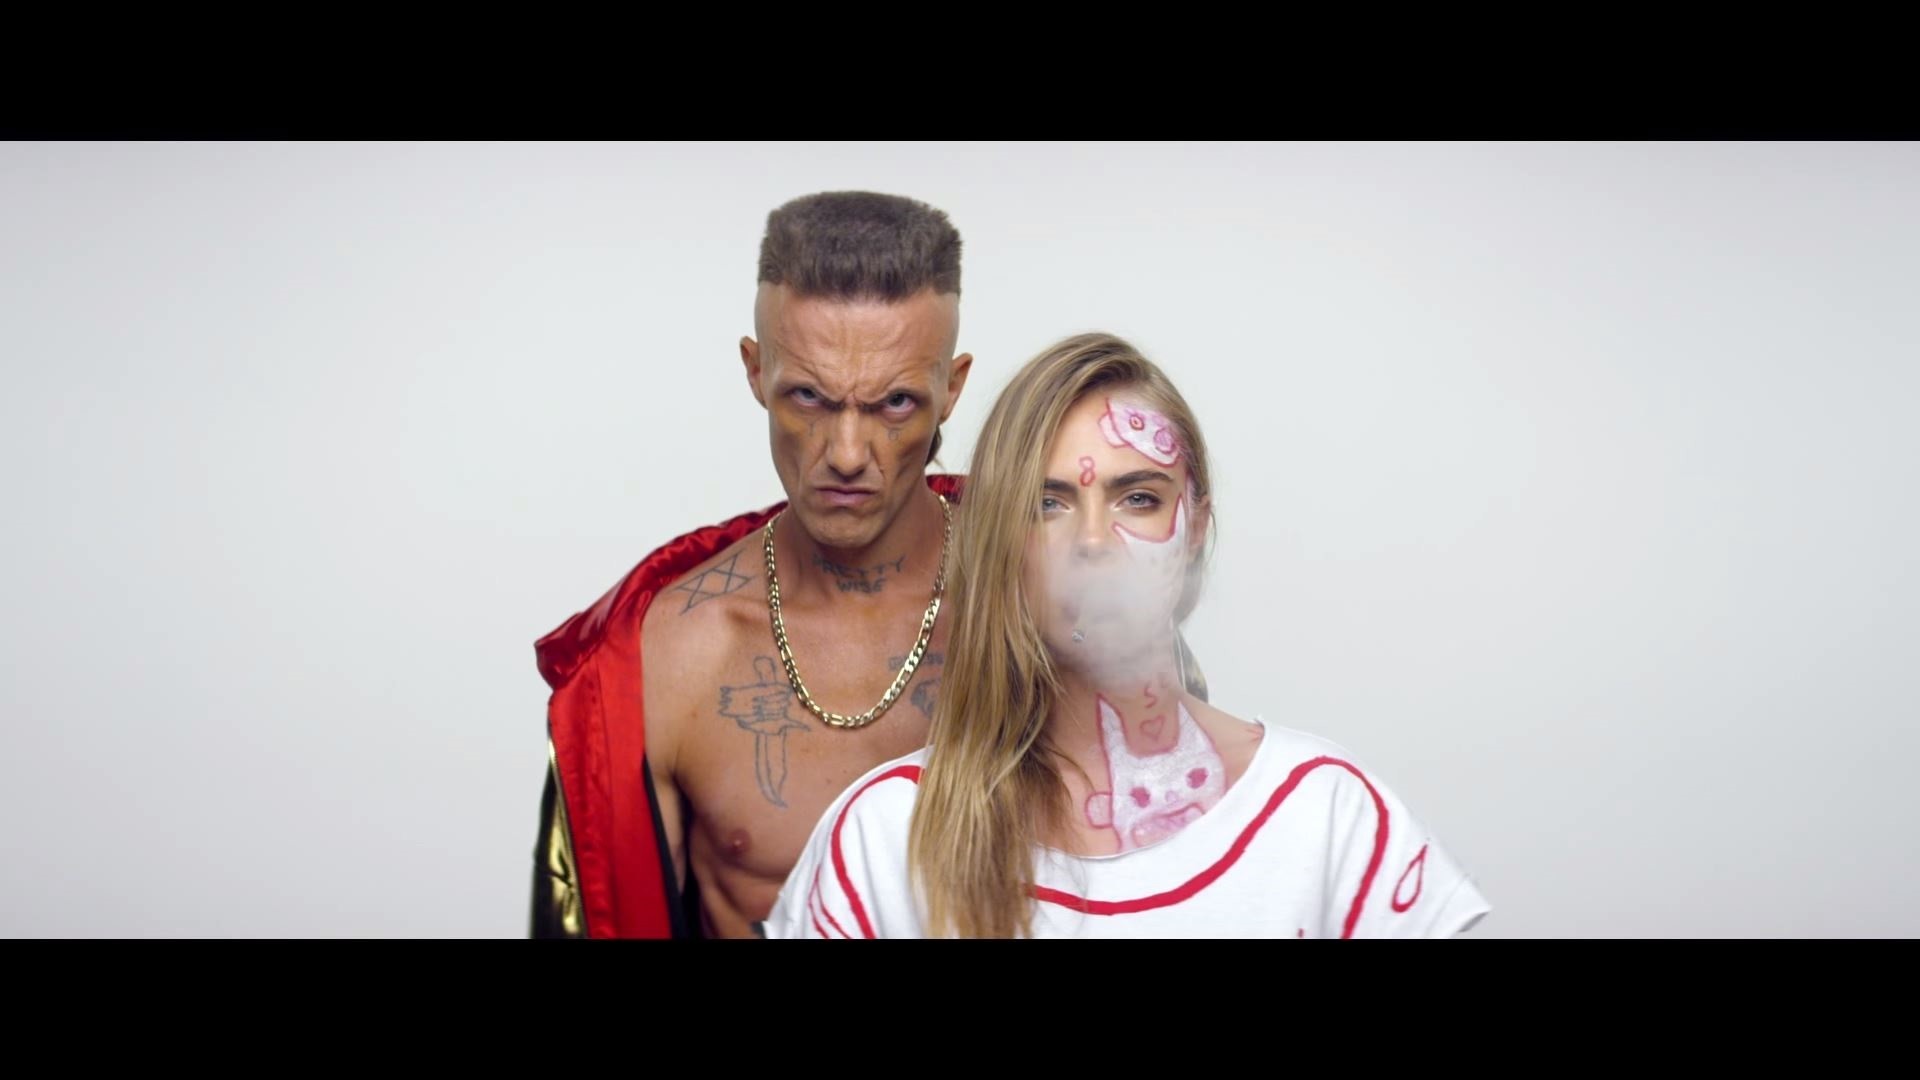 1920x1080 I made a couple wallpapers from the Ugly Boy video. They aren't perfect but  I figured I'd share! : DieAntwoord